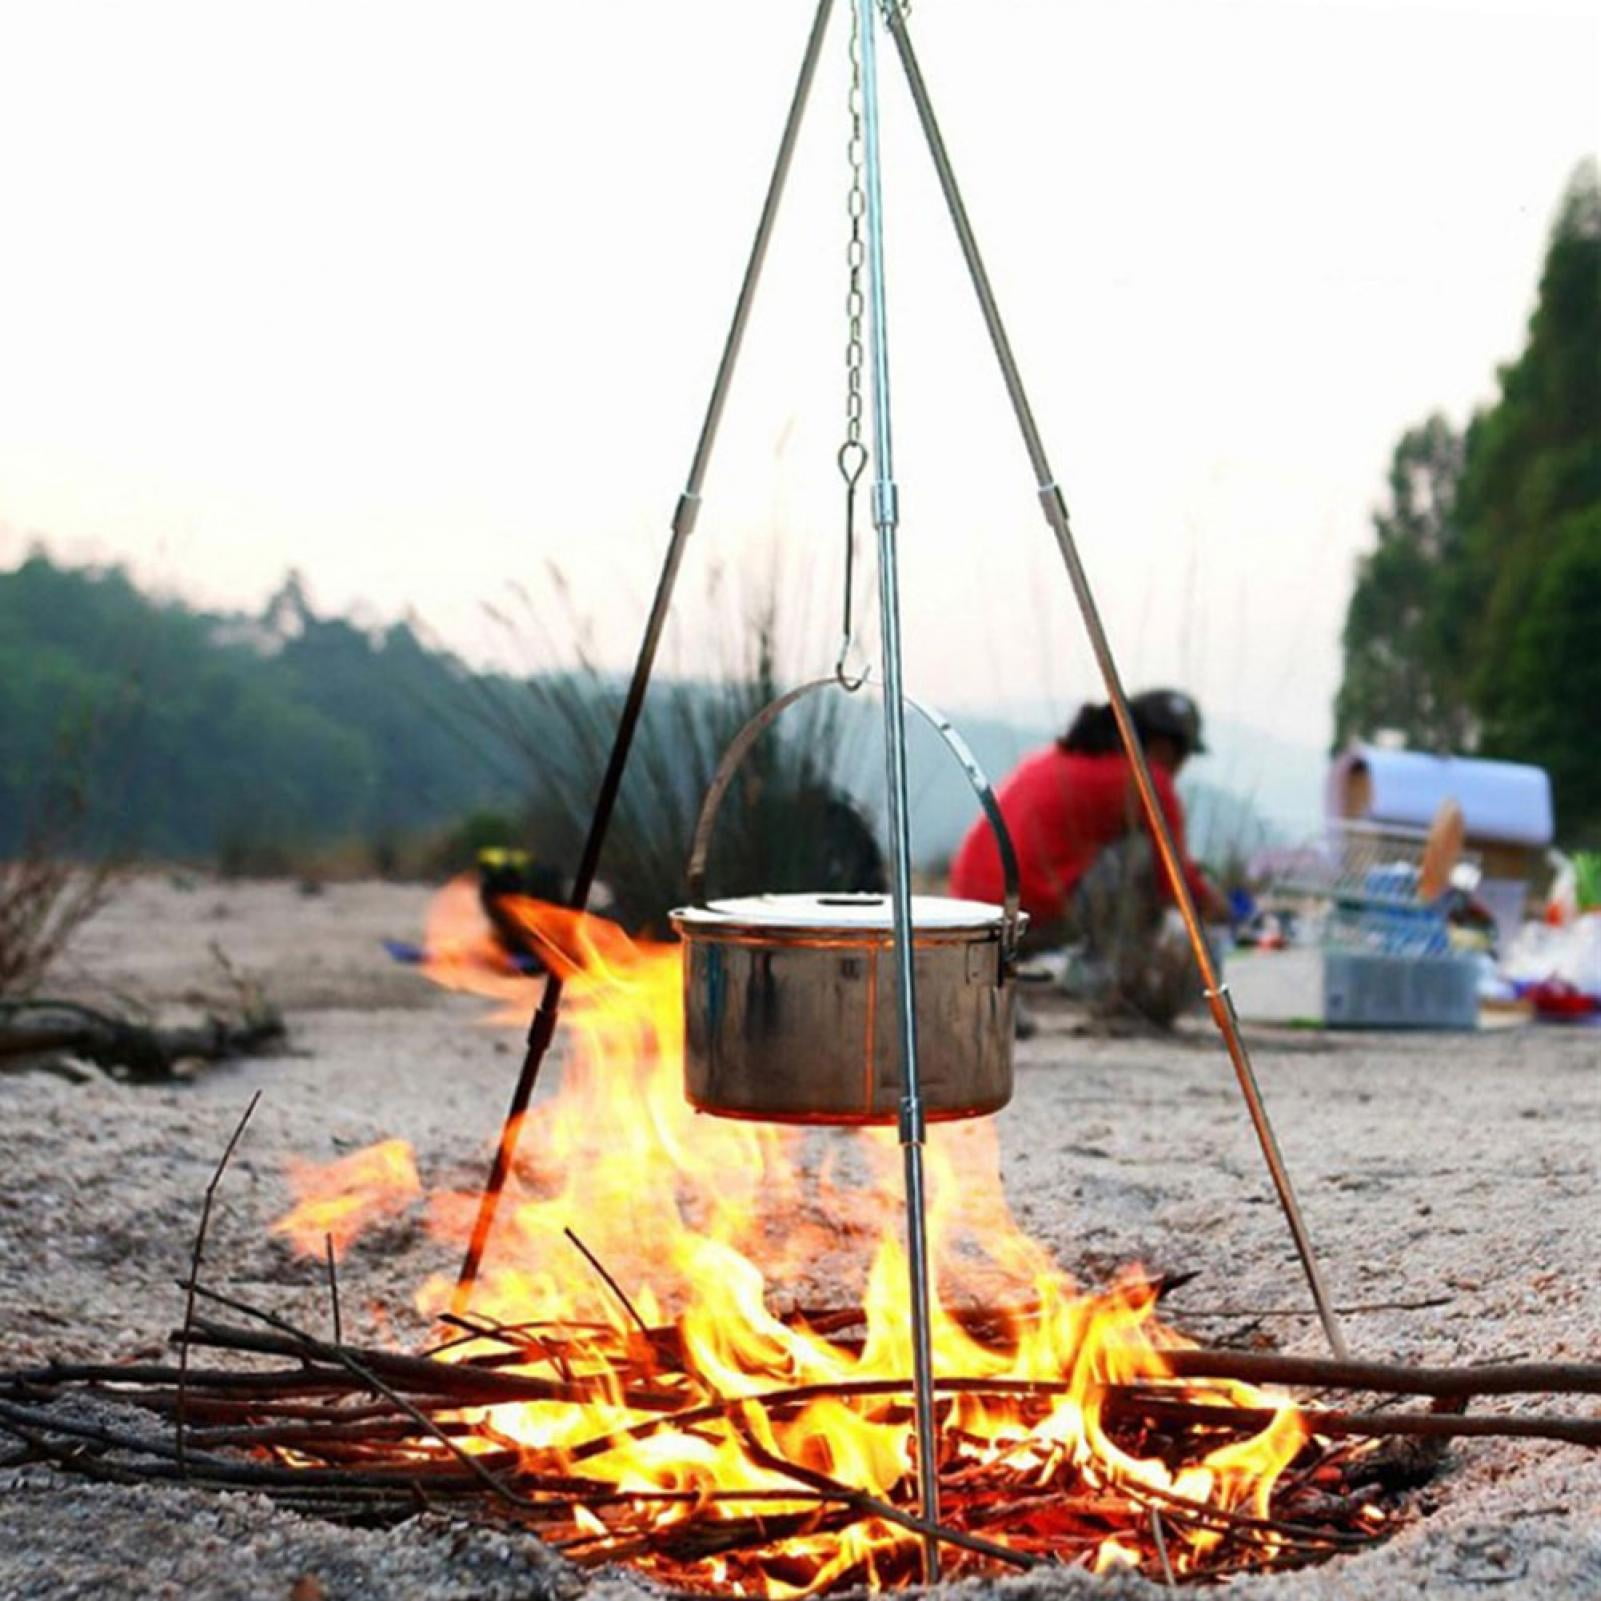 Outdoor Portable Foldable Metal Barbecue Grills Hanging Tripod Camping Picnic BBQ Cooking, Foldable Grills - image 1 of 7